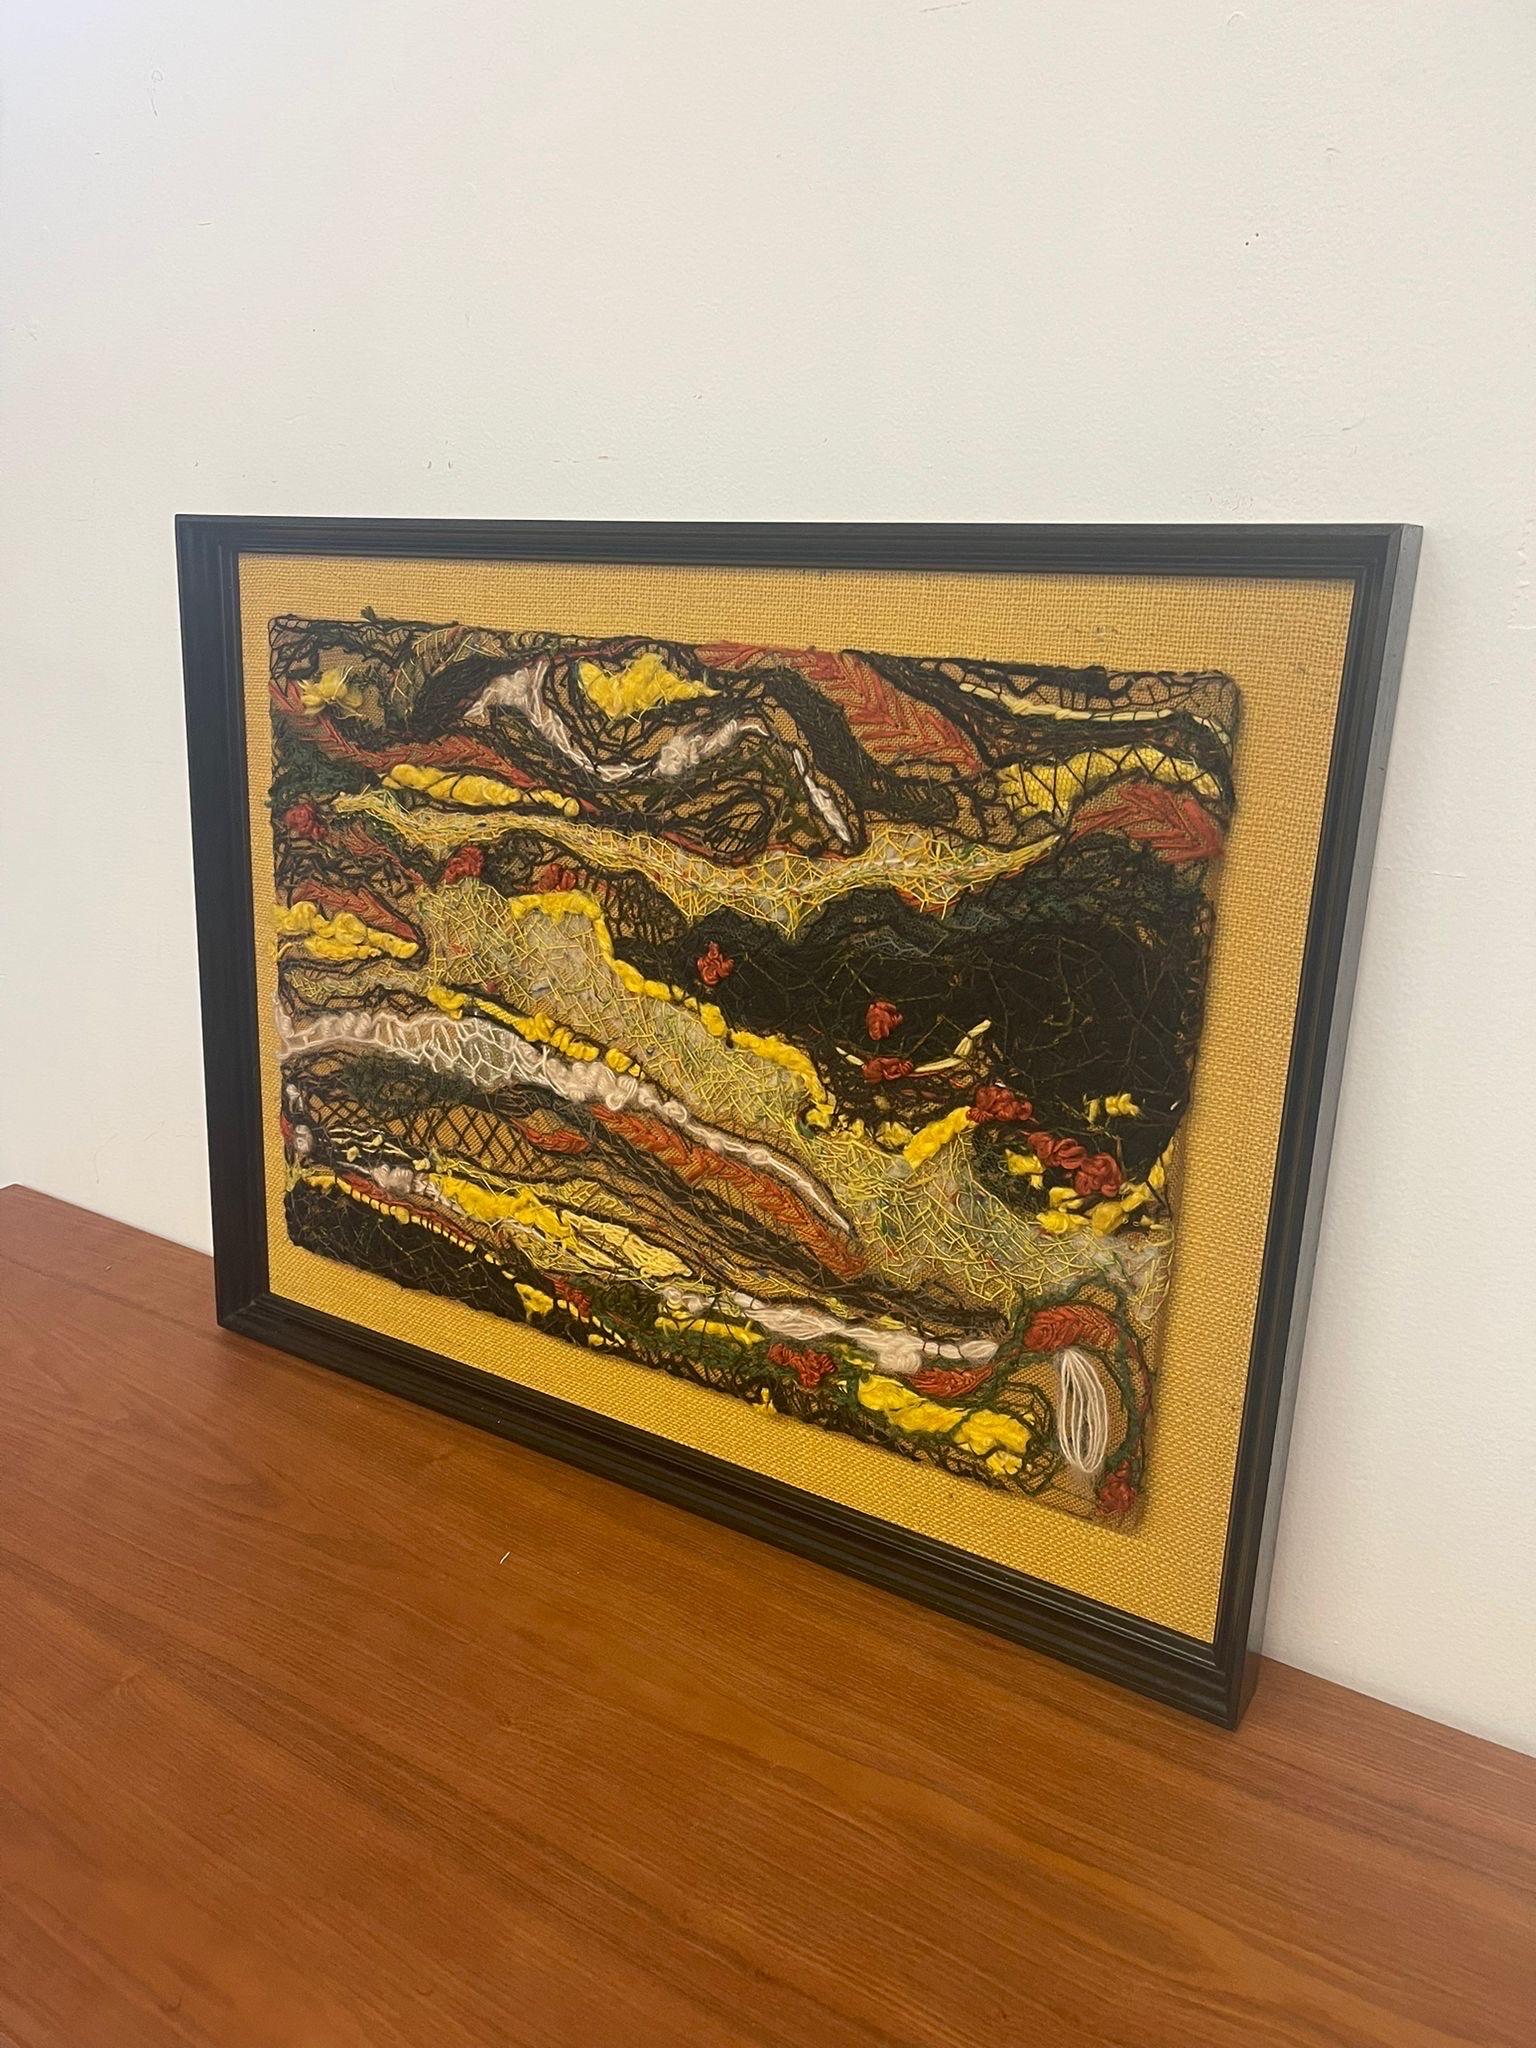 Abstract Textile Artwork within a Black Wood Frame . Primary Color is Yellow, Accents of Black Red and Blue. Vintage Condition Consistent with Age as Pictured.

Dimensions. 28 W ; 3/4 D ; 21 1/2 H